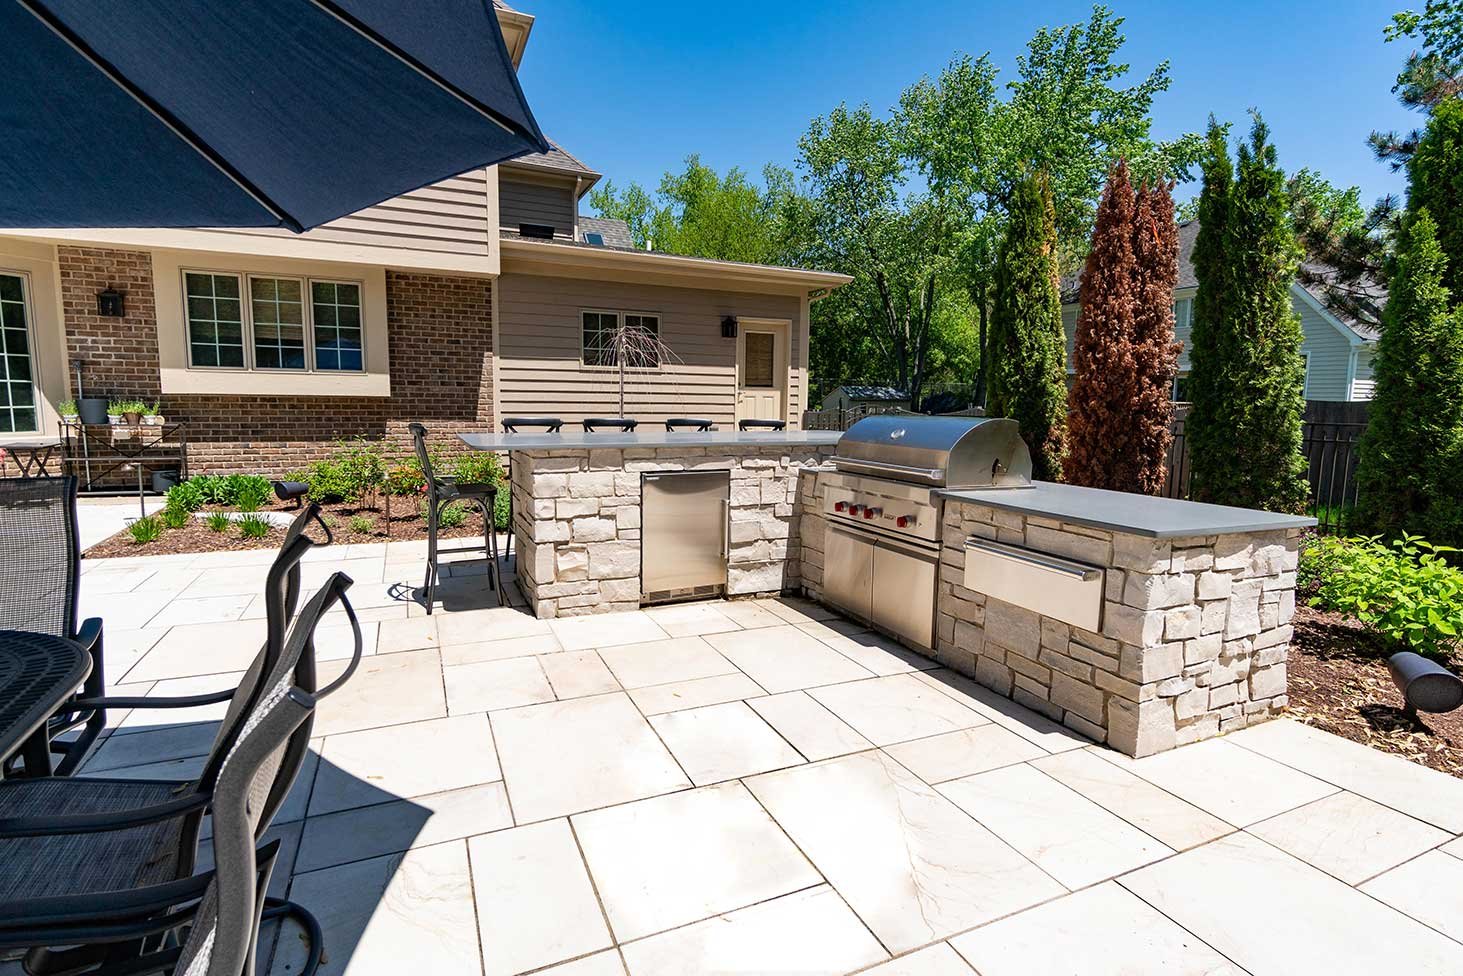 Outdoor kitchen with a prep station, stainless steel grill, pizza oven, and a mini fridge